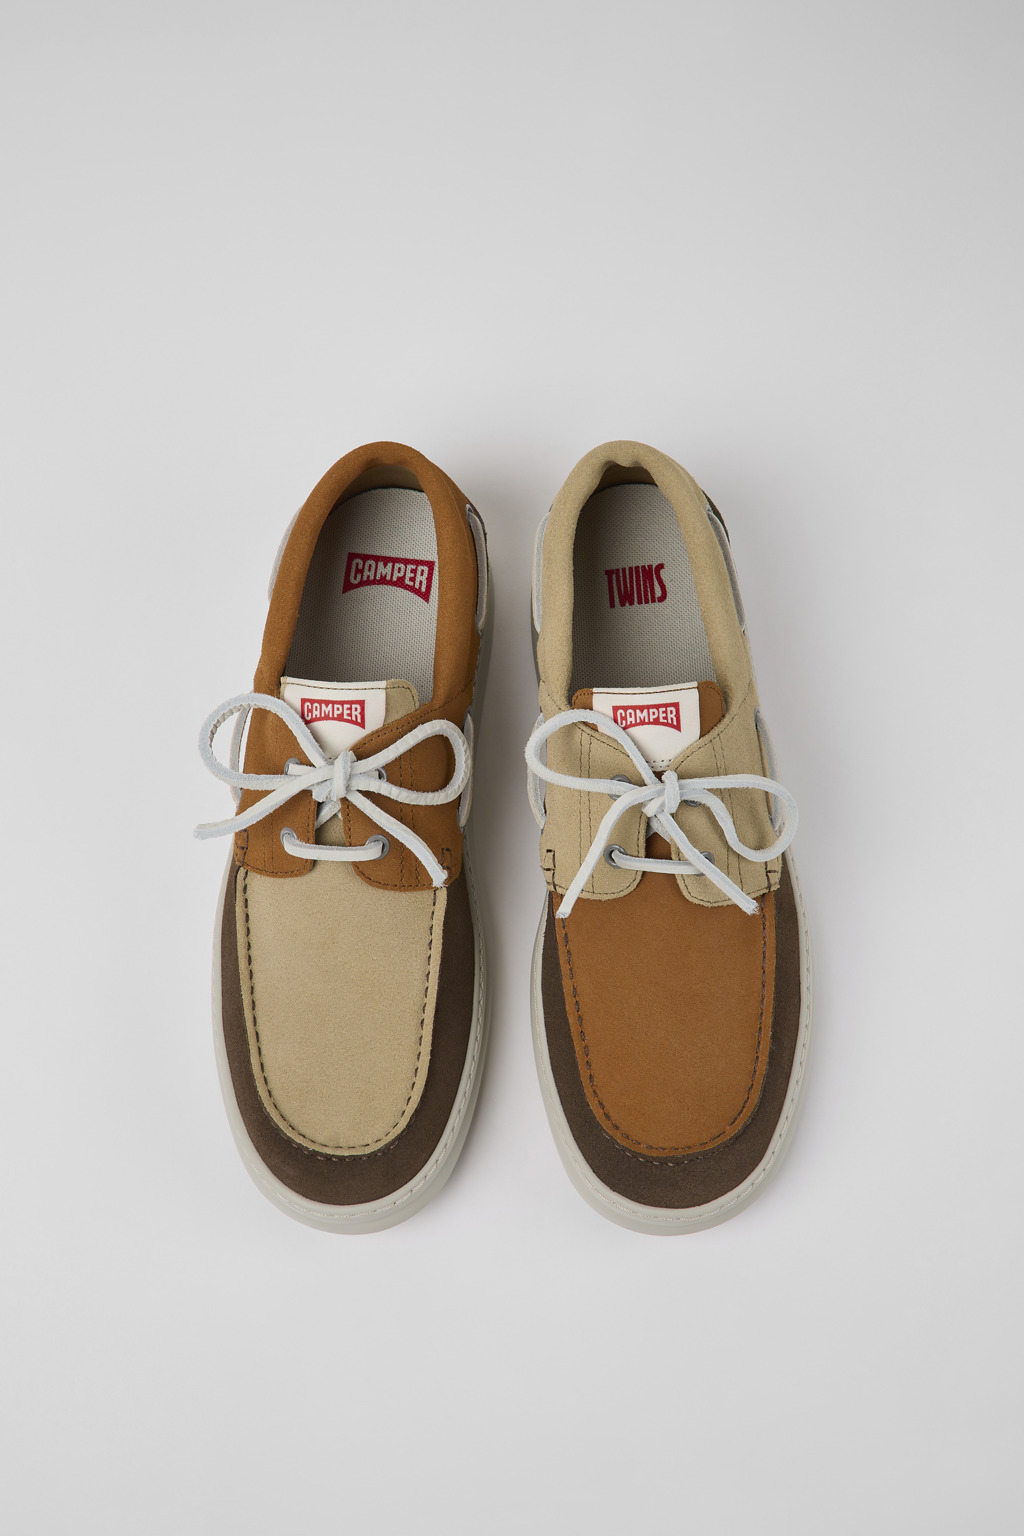 Twins Multicolor Casual for Men - Fall/Winter collection - Camper USA